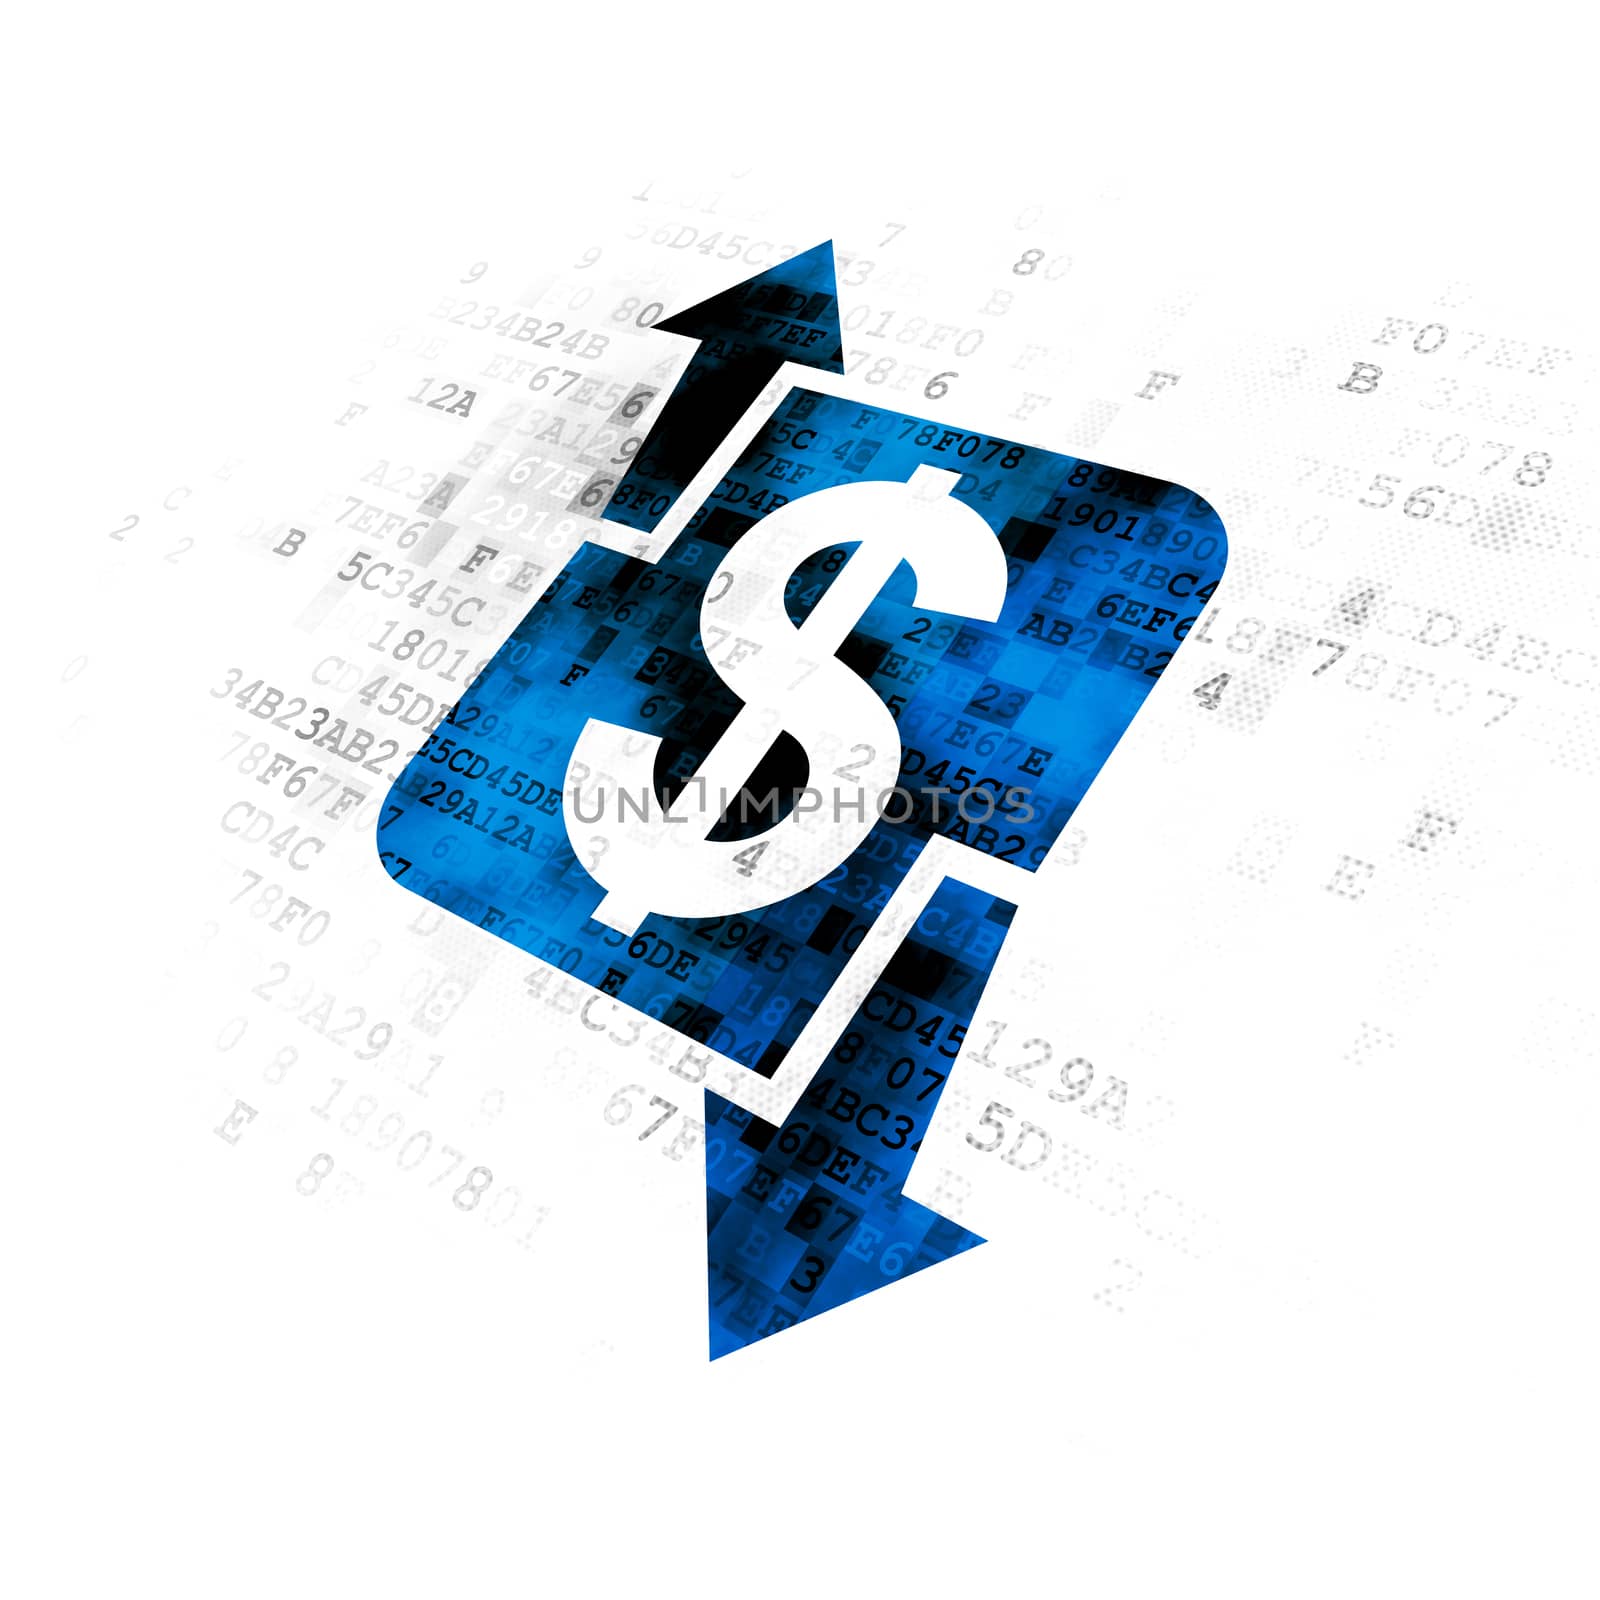 Finance concept: Pixelated blue Finance icon on Digital background